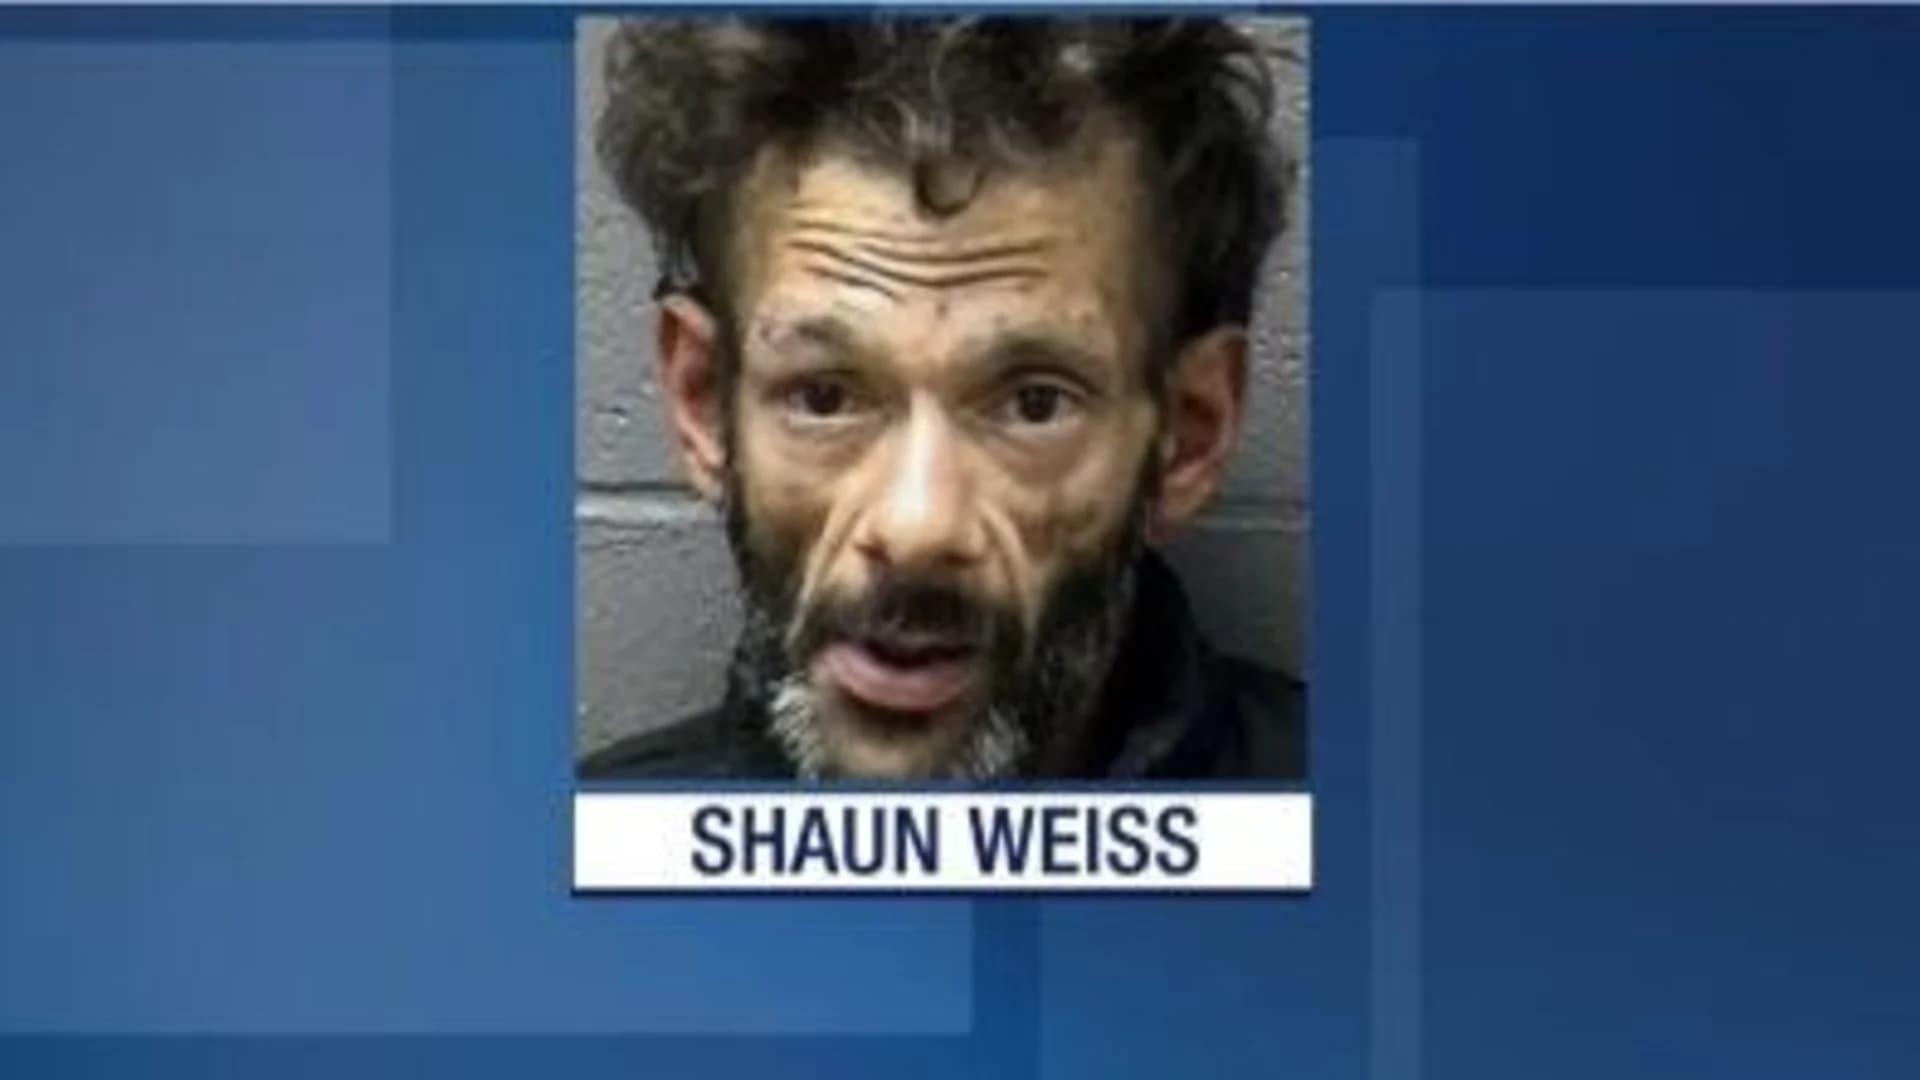 ‘The Mighty Ducks’ actor Shaun Weiss charged with burglary, being under influence of meth